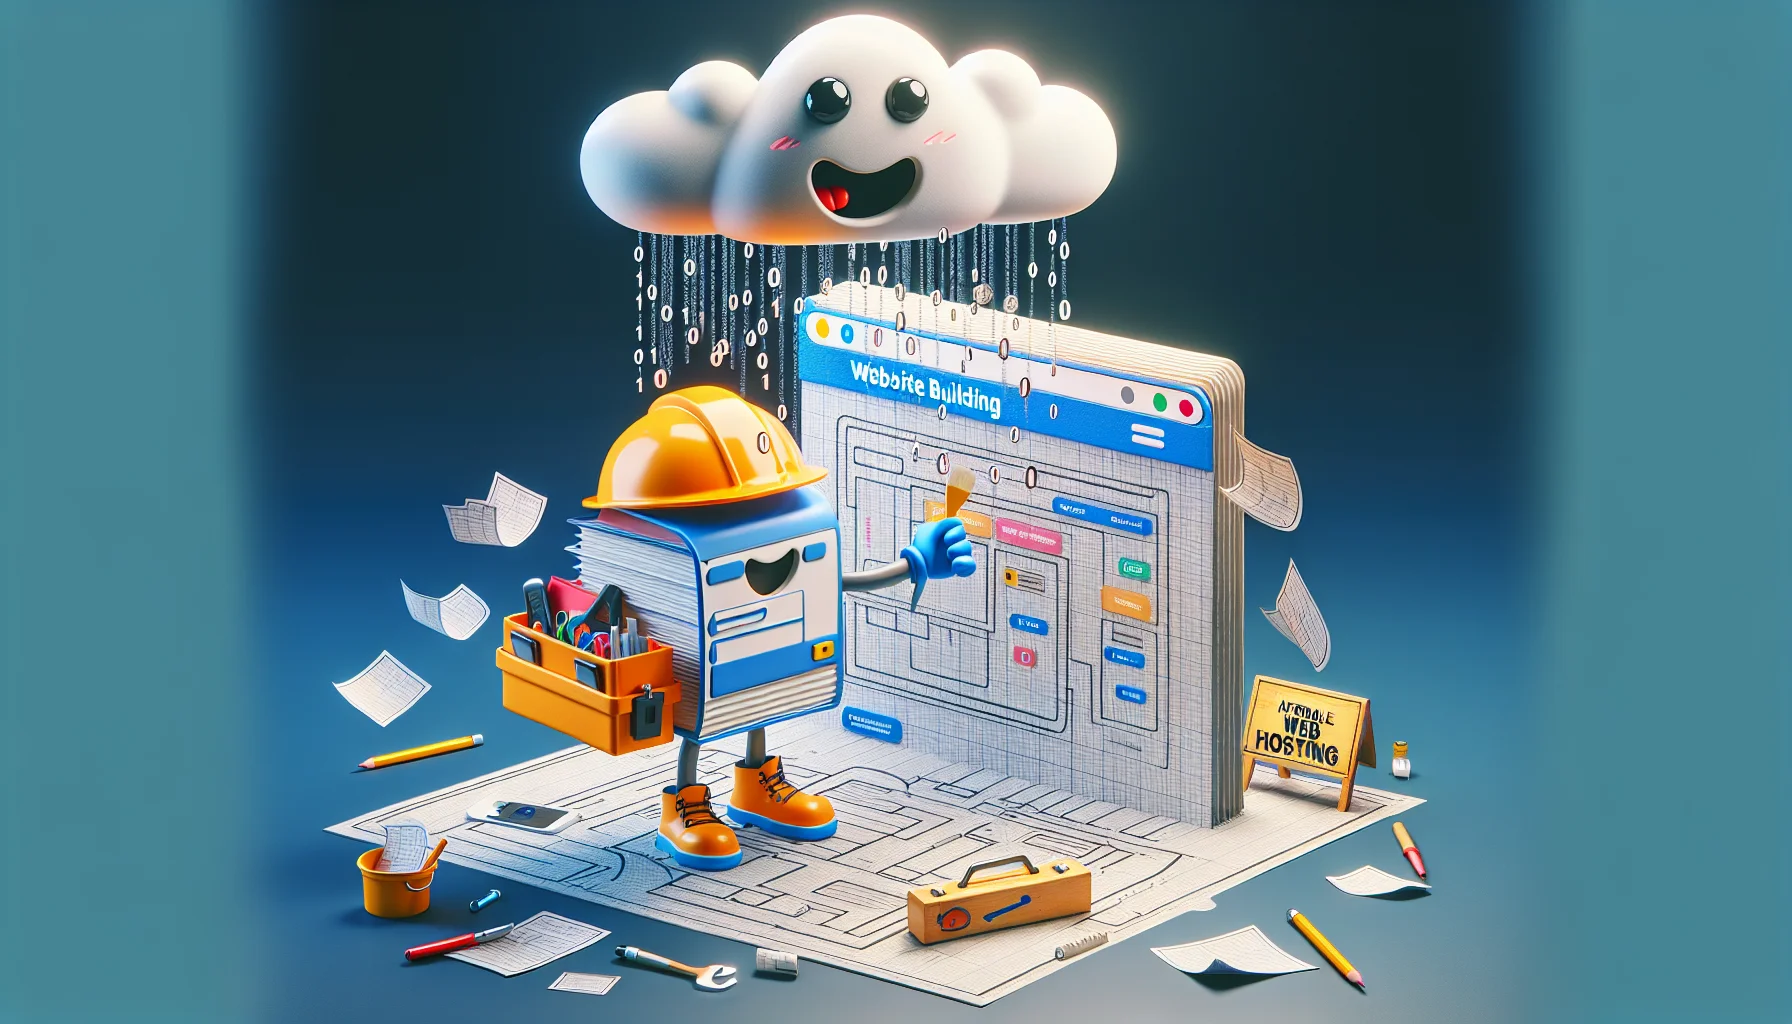 A humorous scene showcasing an imaginary website construction tool. This browser-based tool comes to life as a friendly cartoon character with a builder's hardhat and a toolbox full of design elements. It playfully arranges and rearranges various website elements on a blueprint of a web page layout, under a hovering cloud that pours a light rain of binary 1s and 0s, symbolizing web hosting. Leaning against the corner of the blueprint is a sign that reads 'Affordable Web Hosting' with a smiley face on it. The scene strikes a balance between whimsy and the realistic functionality of the website builder tool.